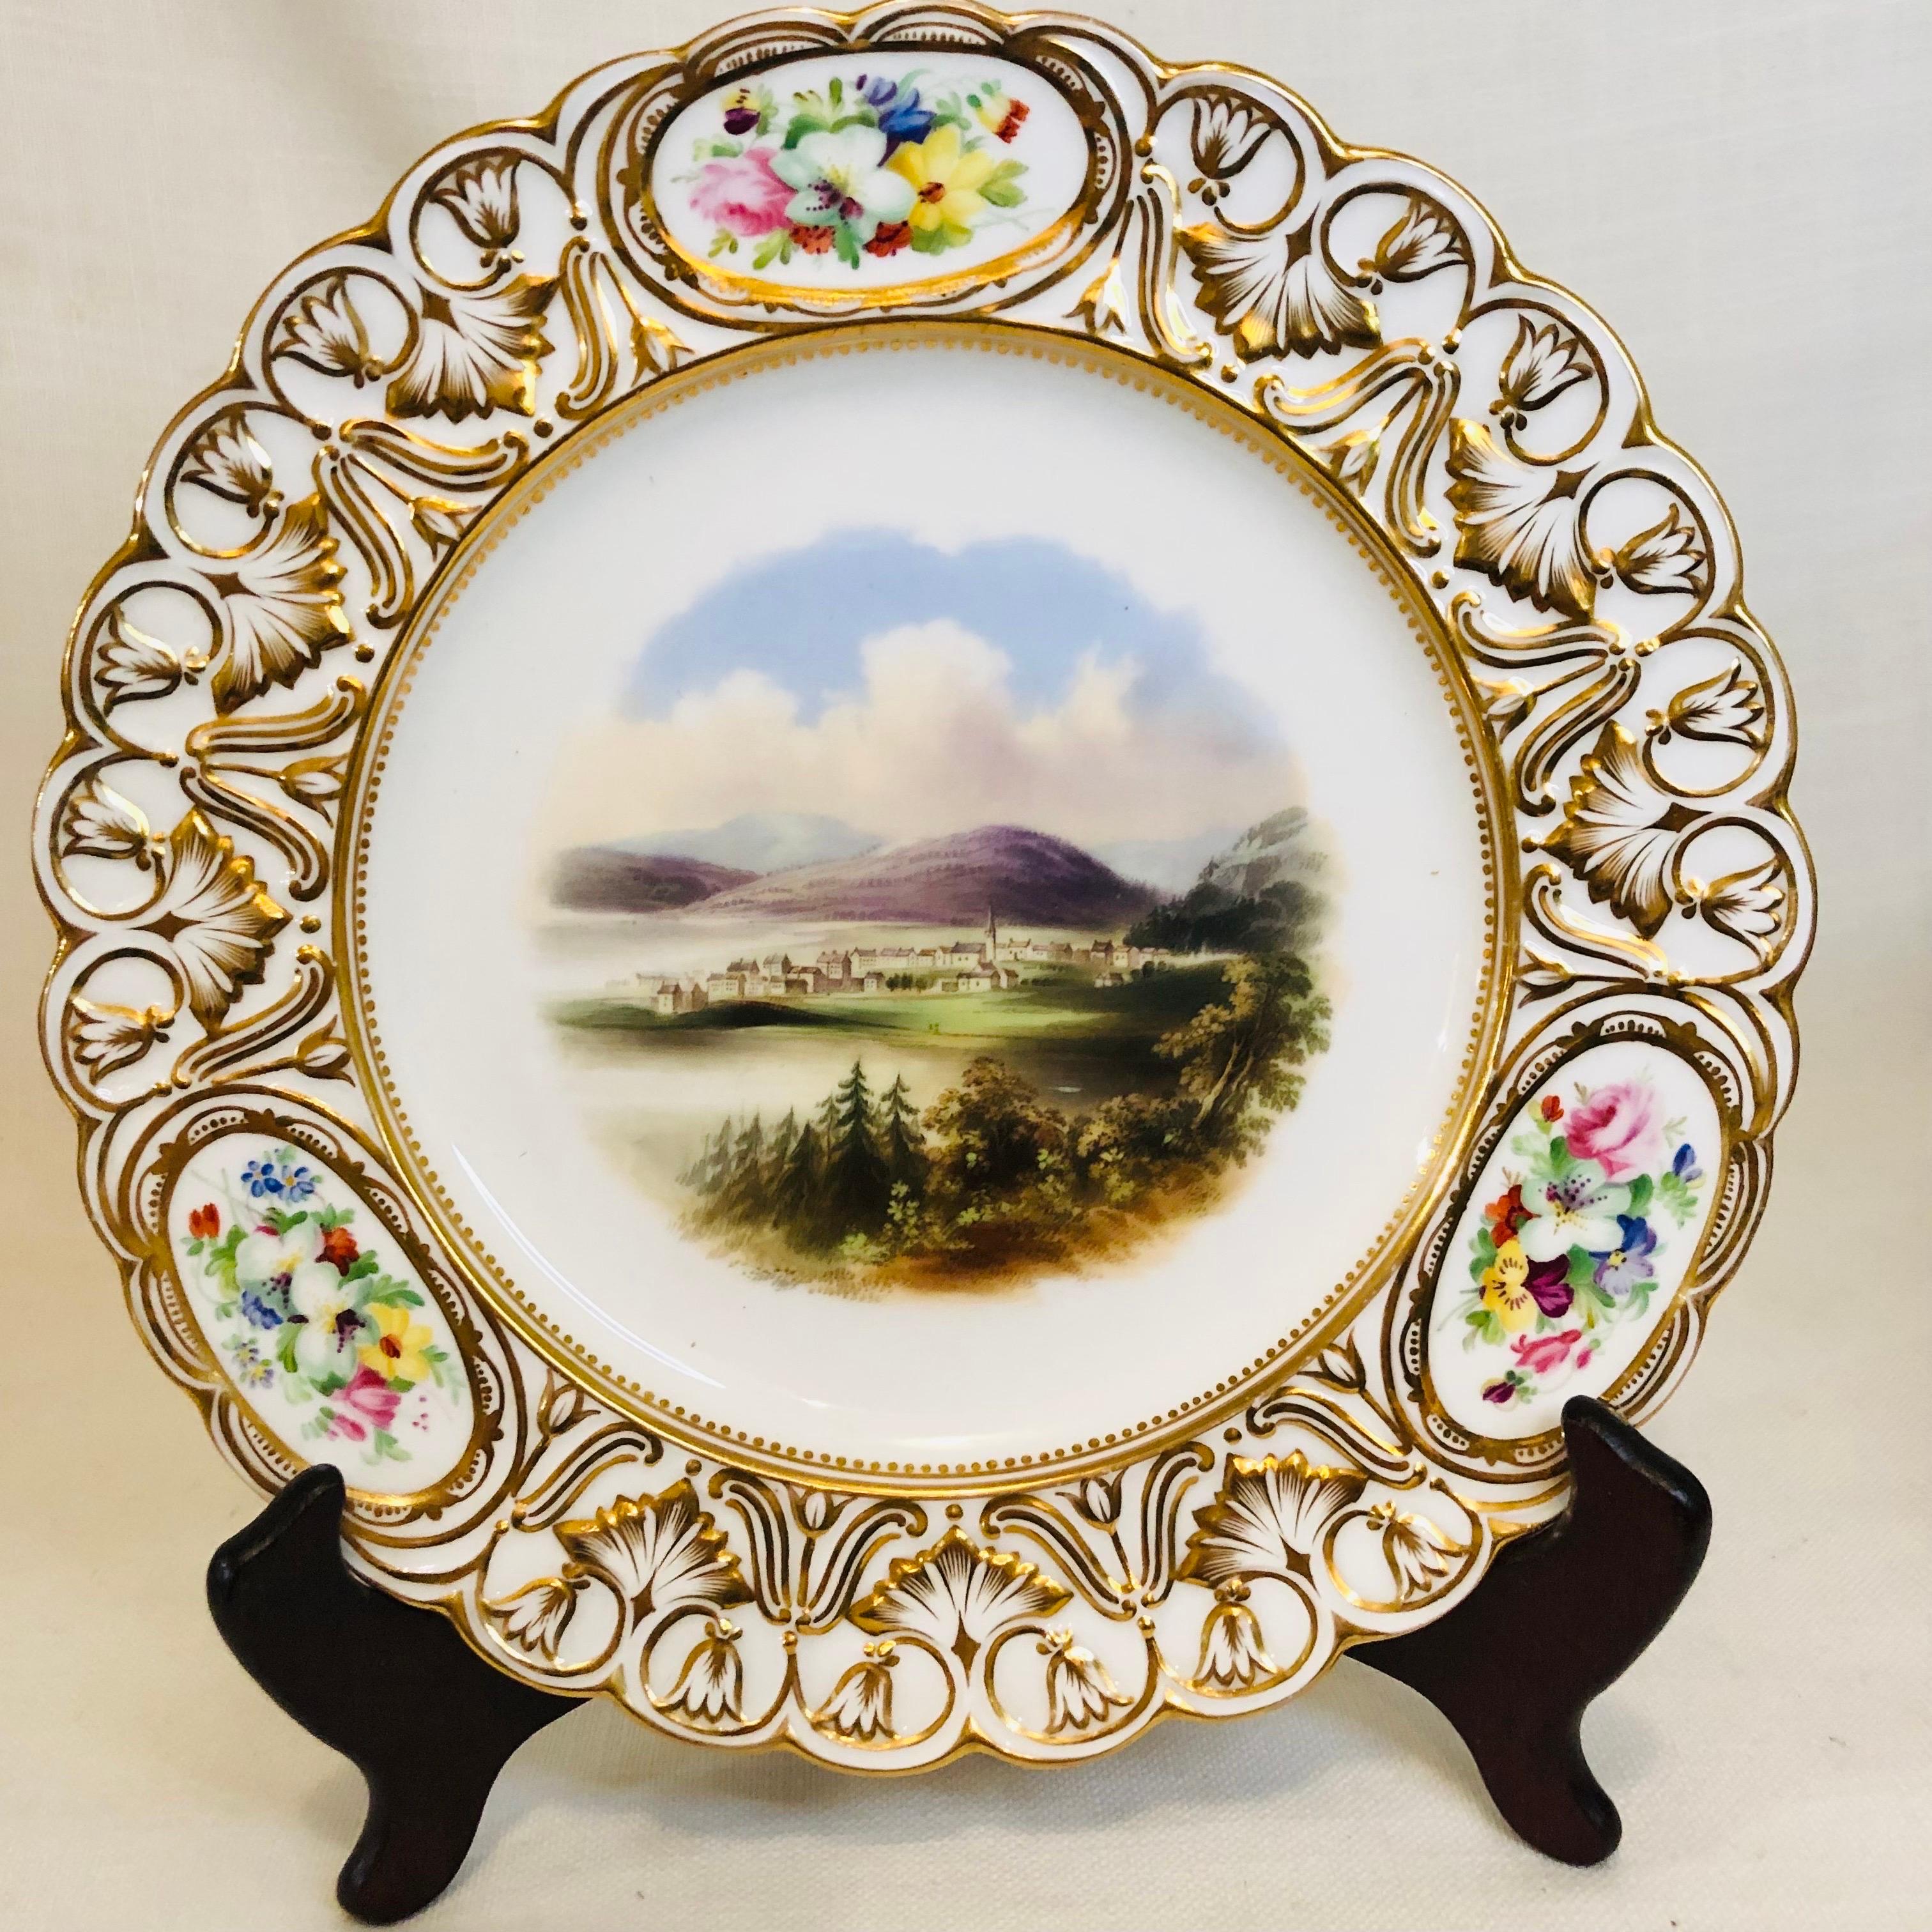 Set of 16 19th Century Coalport Plates Each Hand-Painted with Magnificent Scenes For Sale 13